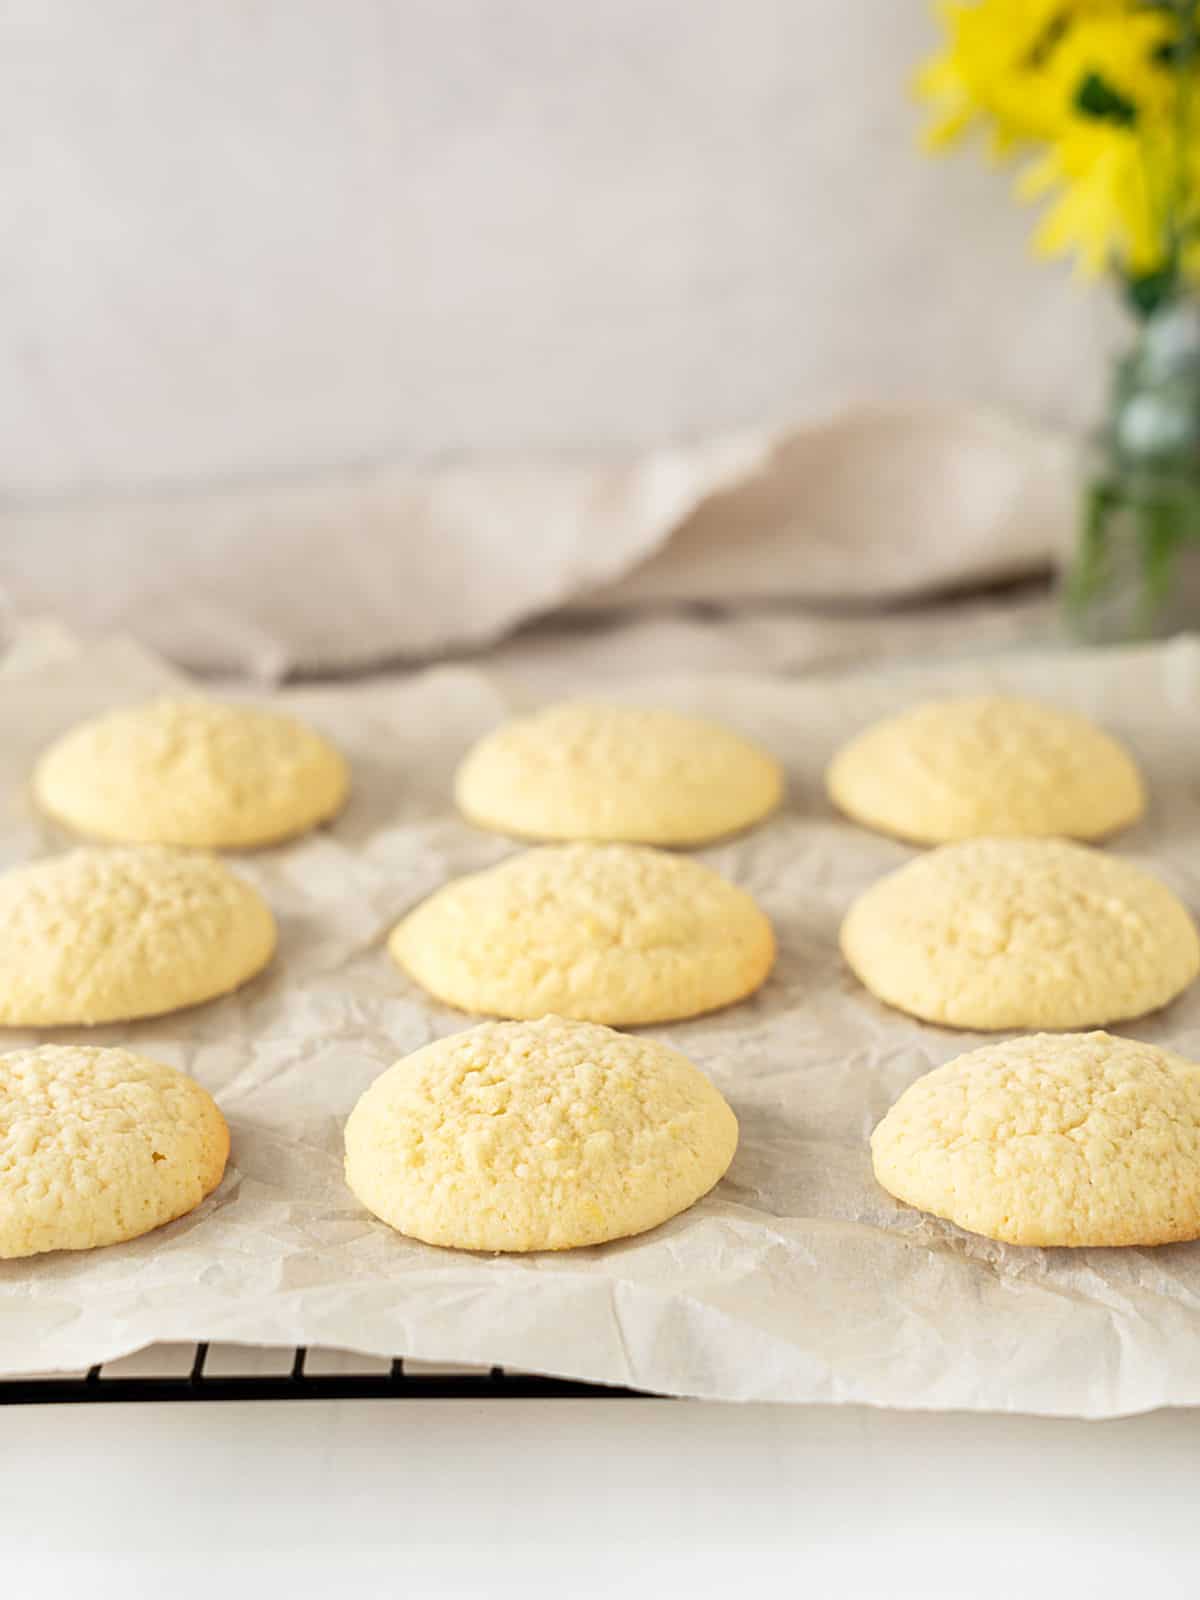 Plain baked ricotta cookies on white paper. Gray background, yellow flowers.